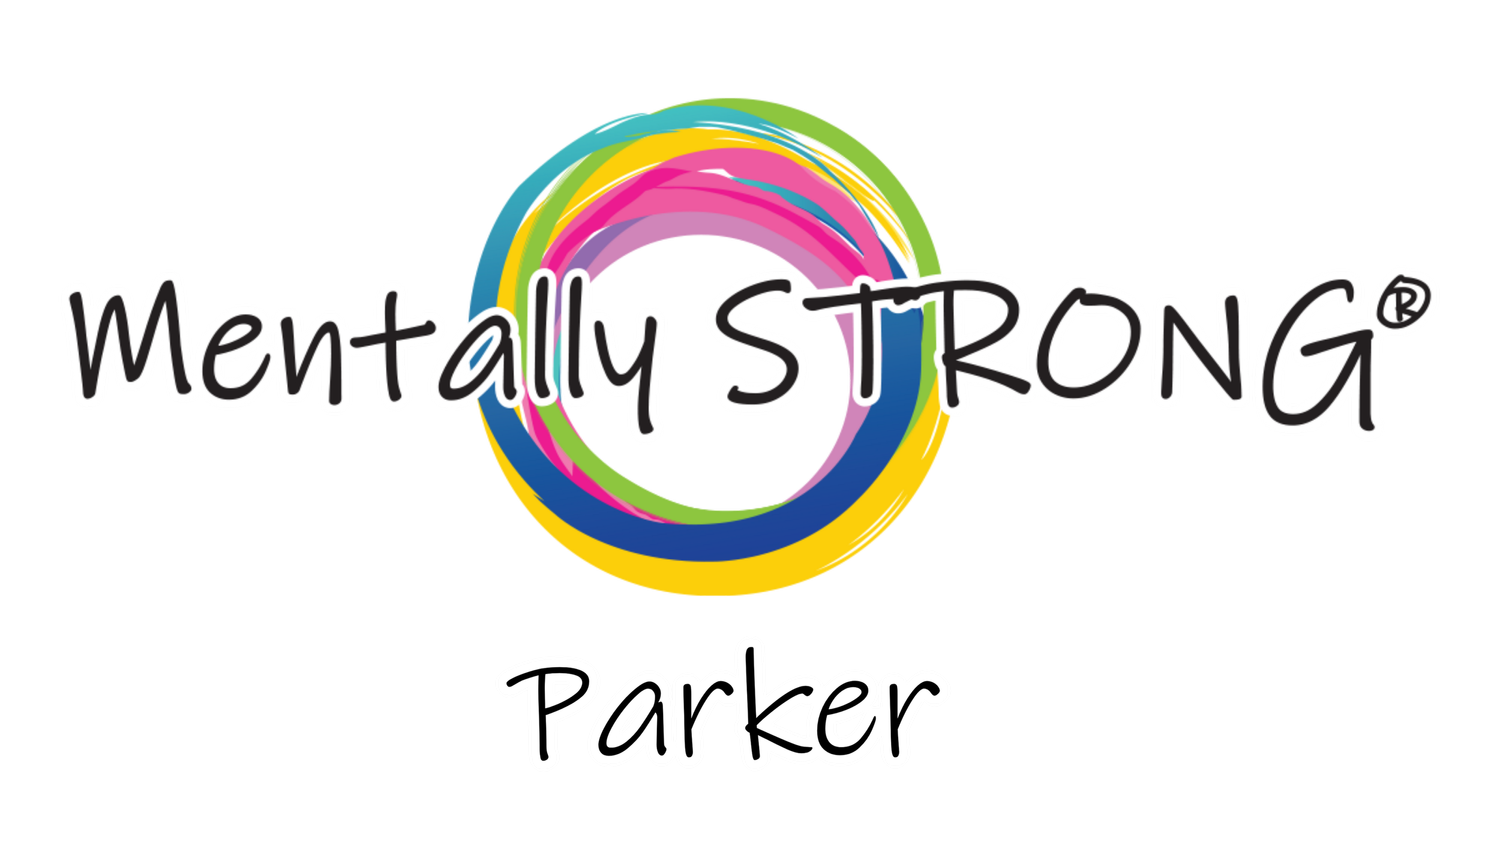 Mentally Strong Parker